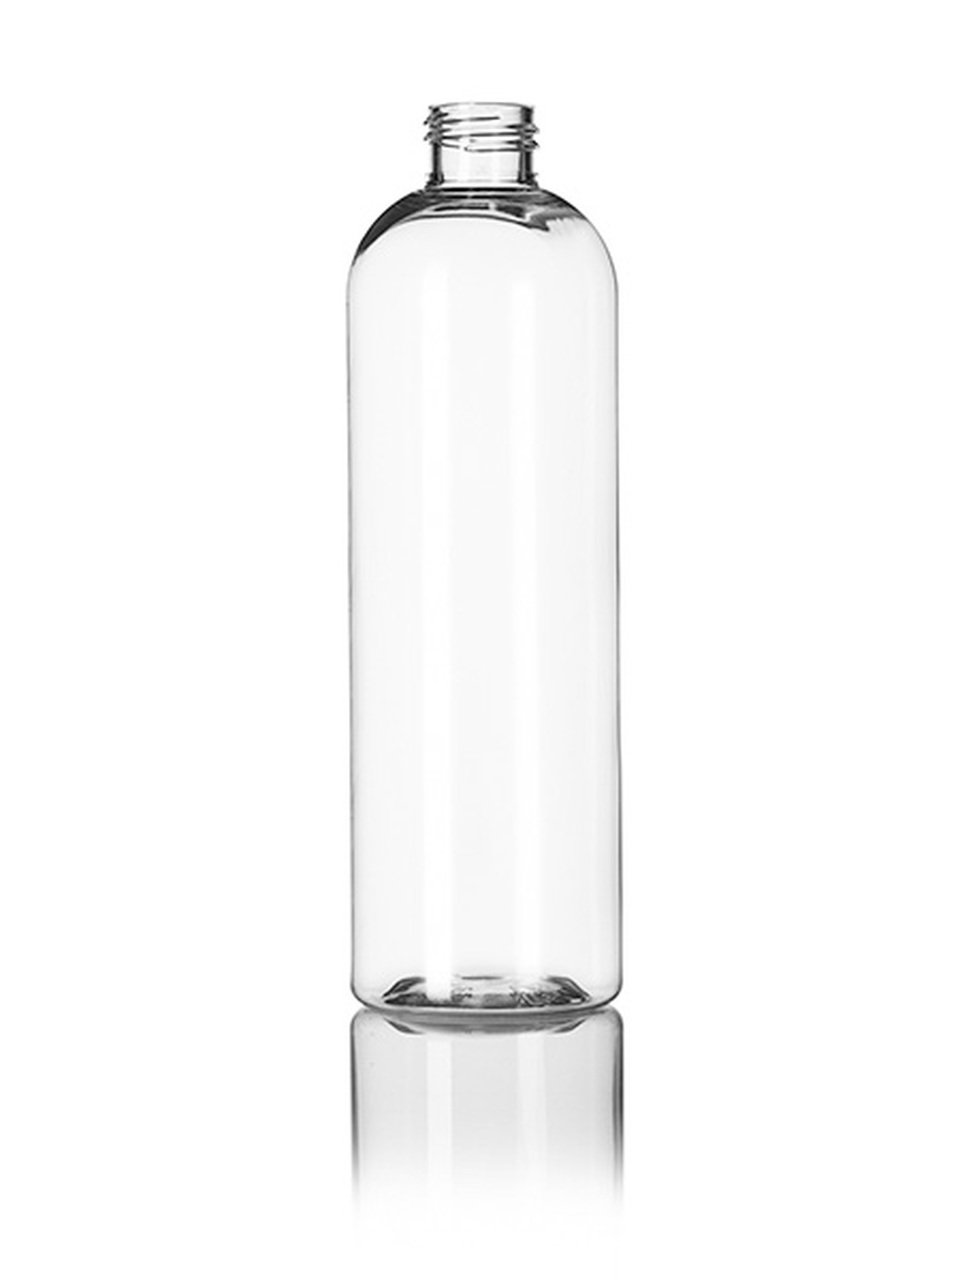 12 oz clear PET cosmo round bottle with 24-410 neck finish - 200 per case - Rock Bottom Bottles / Packaging Company LLC